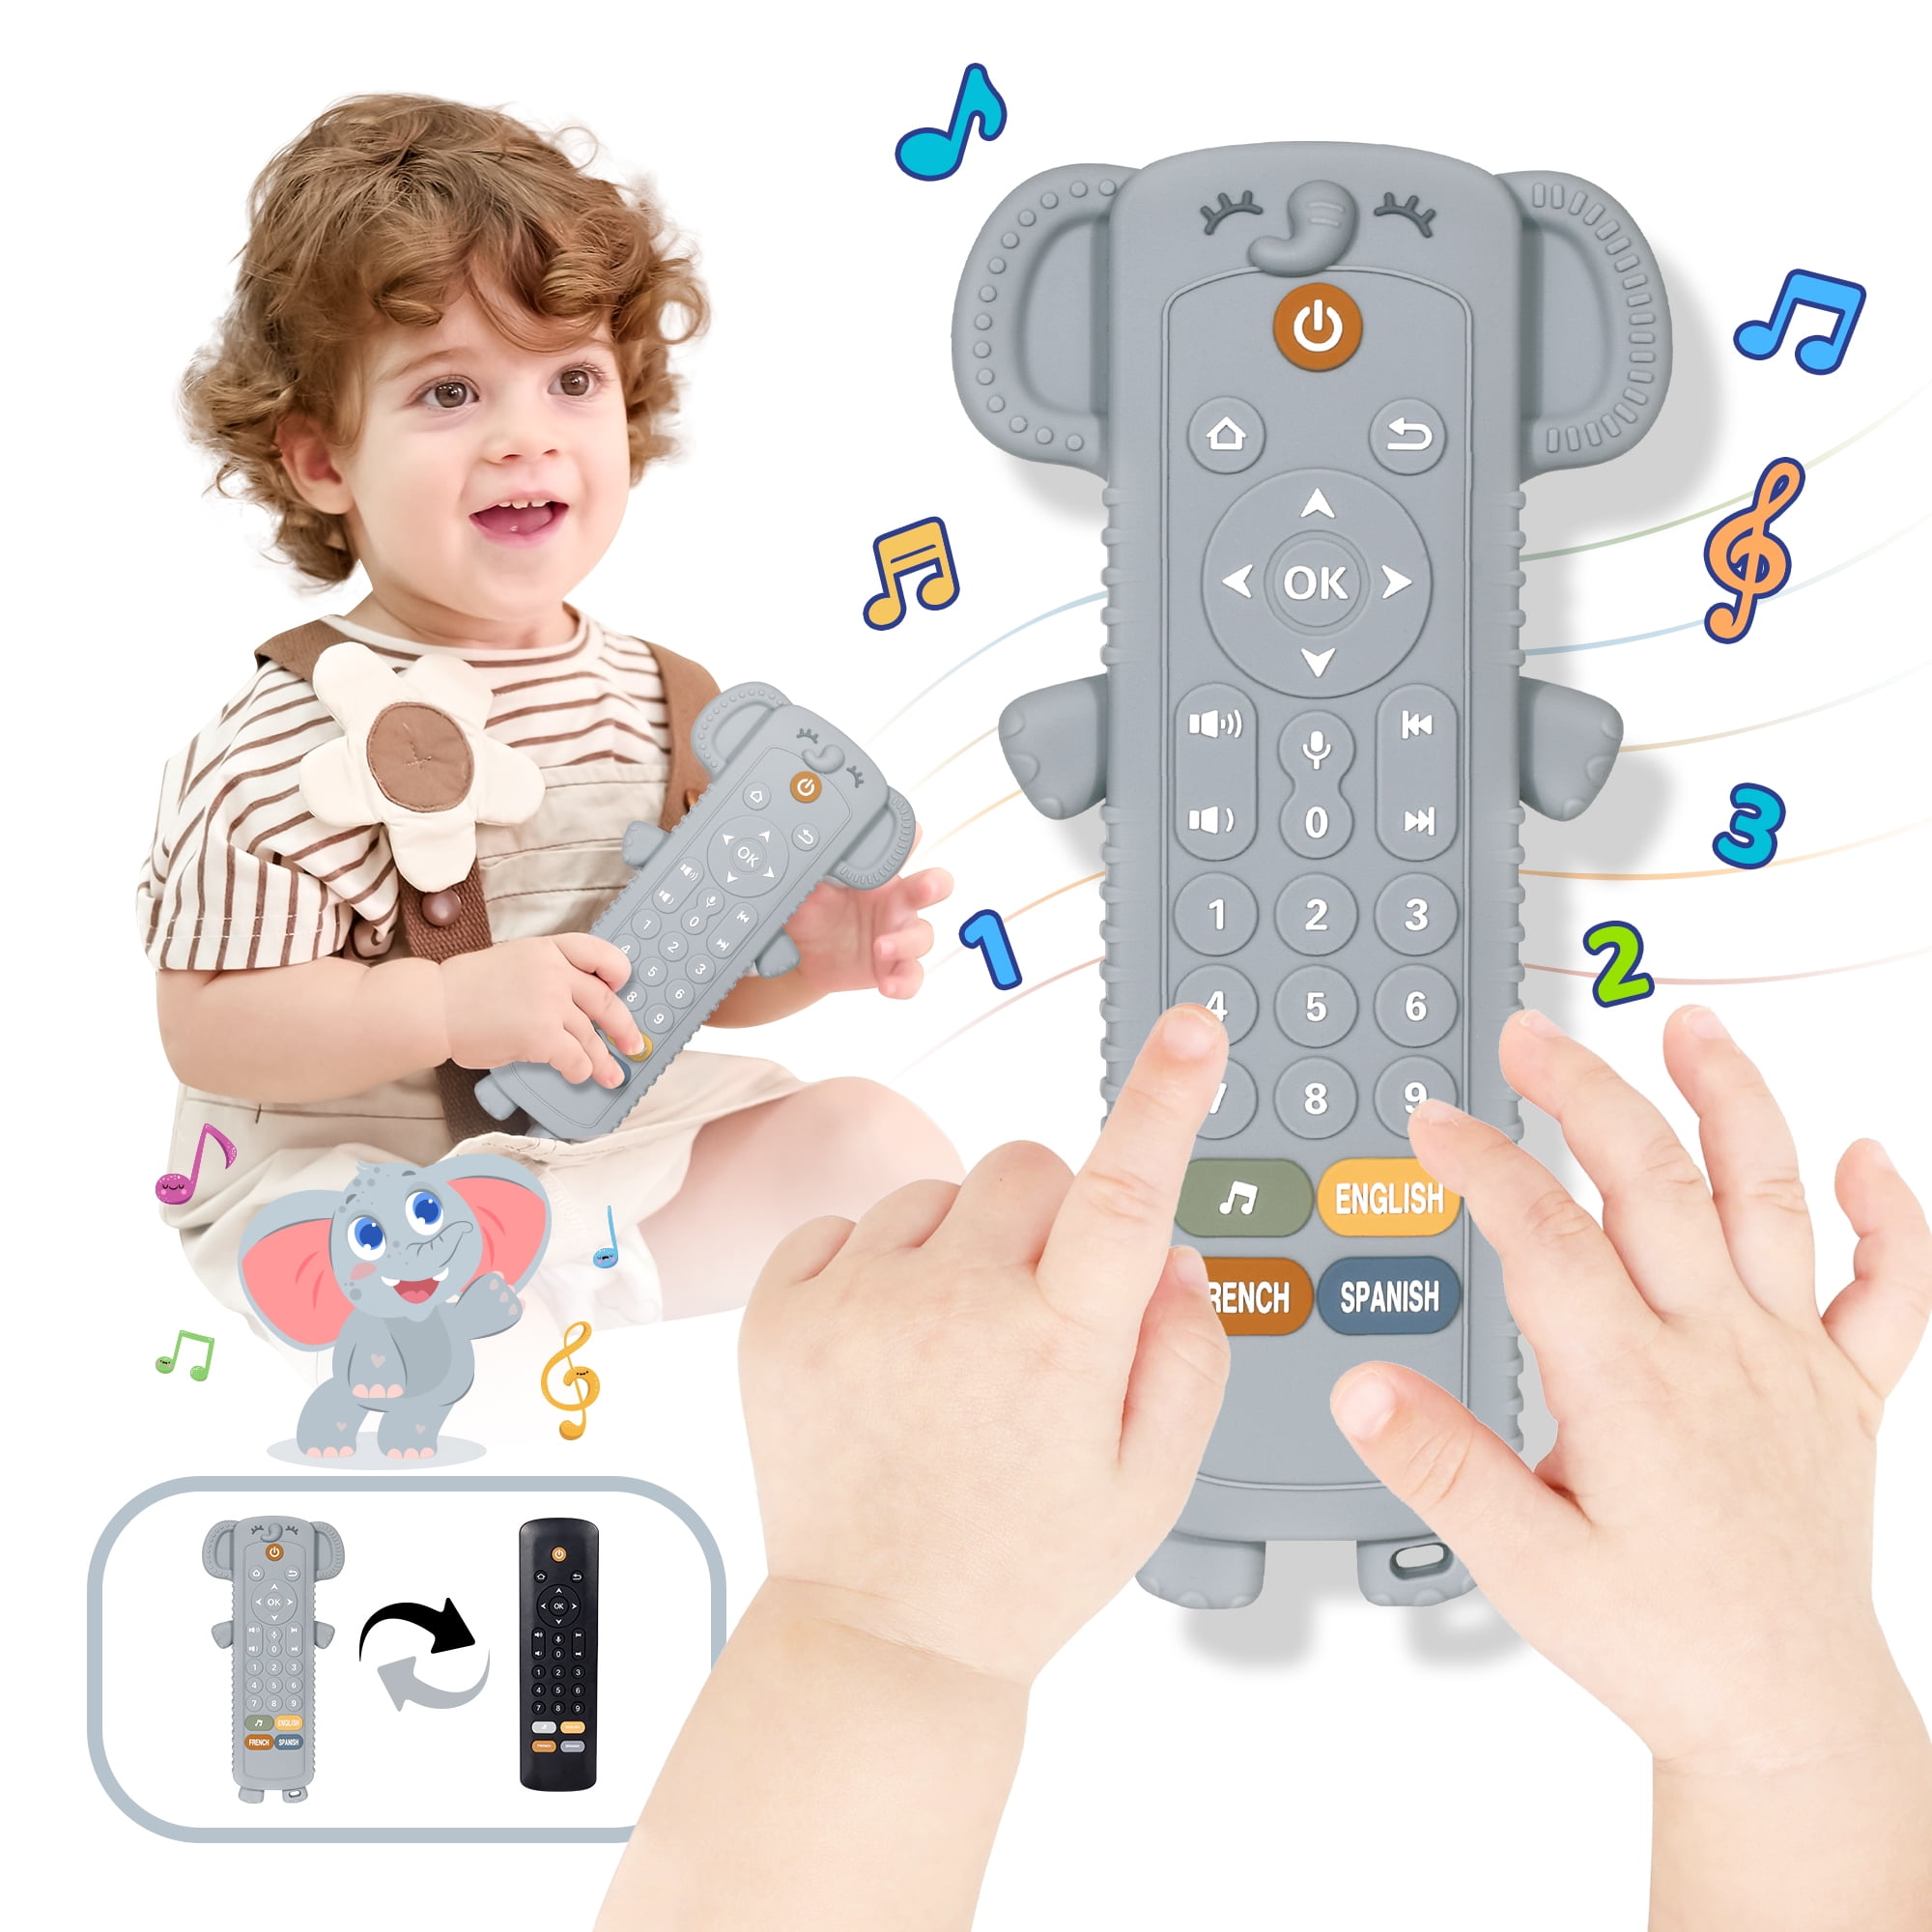 Baby Toys - Baby Remote Control Toy with Elephant Silicone Cover -  Educational Musical Baby Toddler Toys with Realistic Play, Lights, and  Sounds - Boy